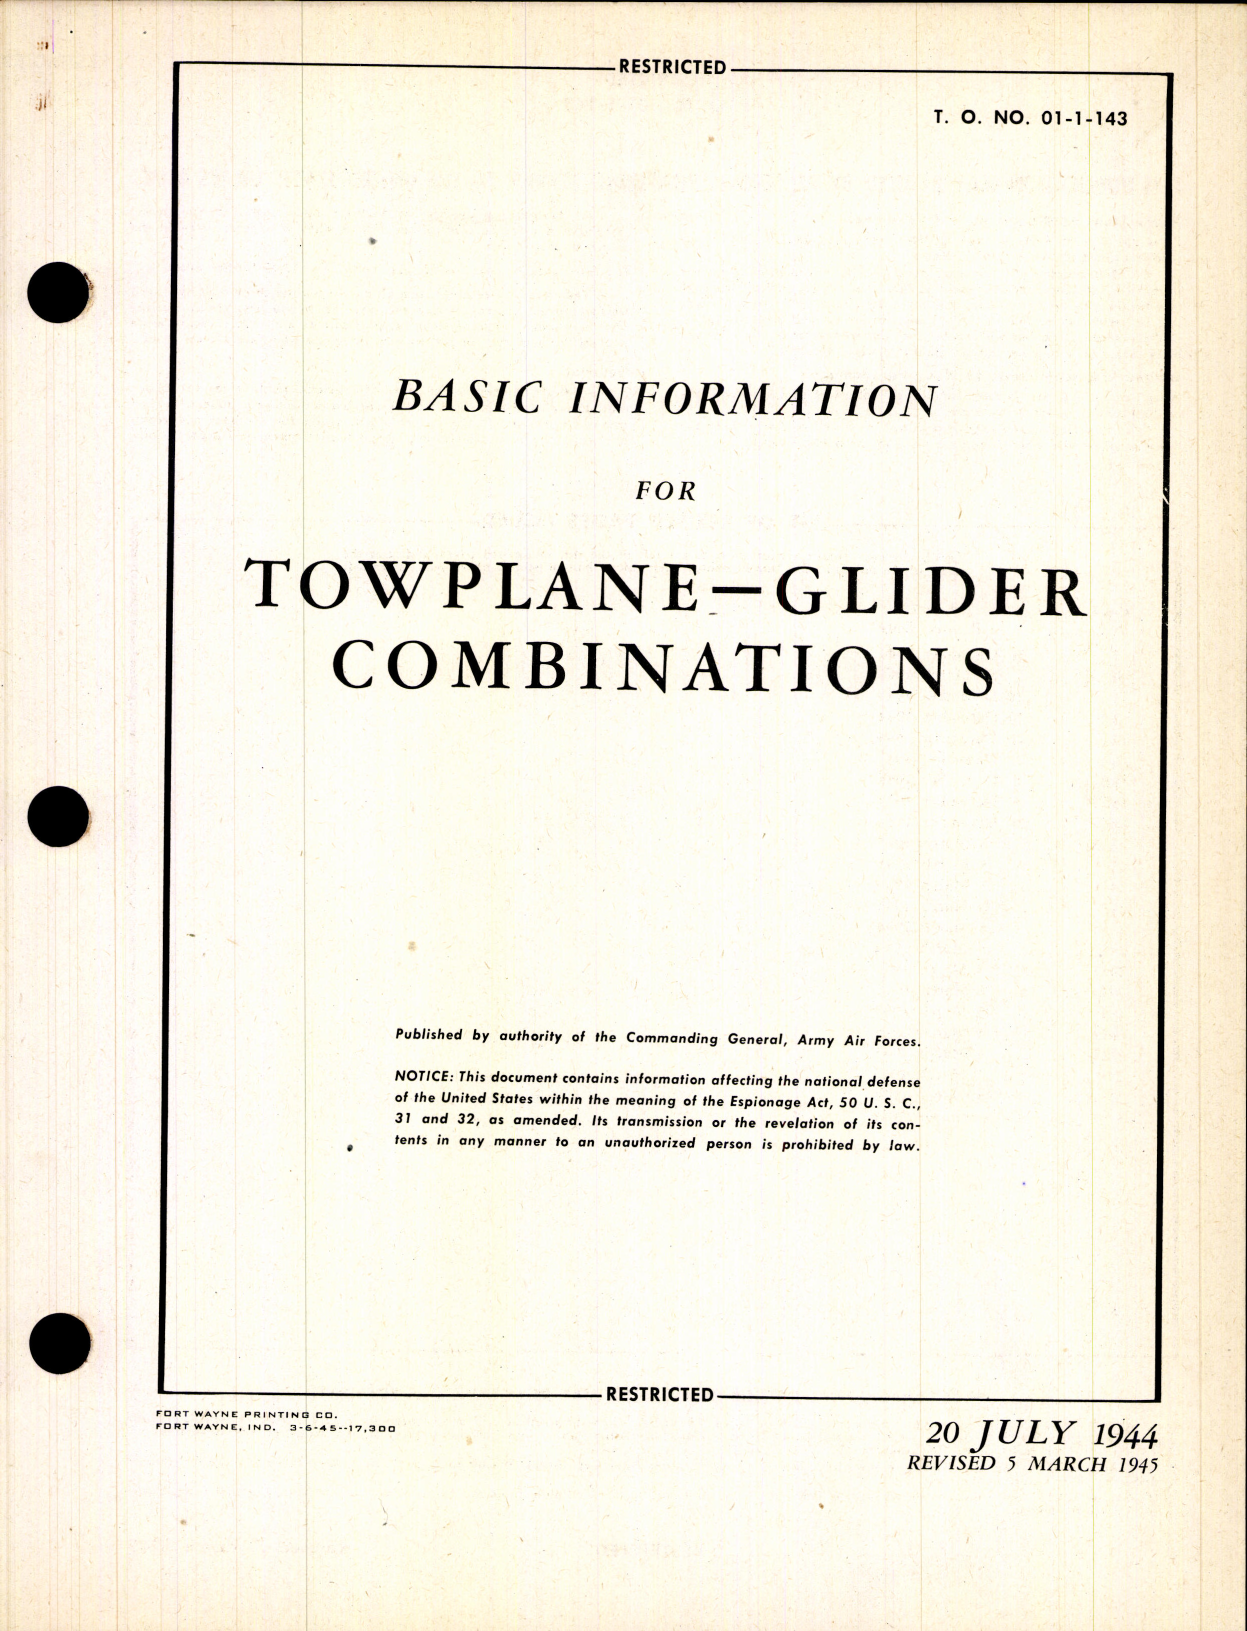 Sample page 1 from AirCorps Library document: Basic Information for TowPlane-Glider Combinations